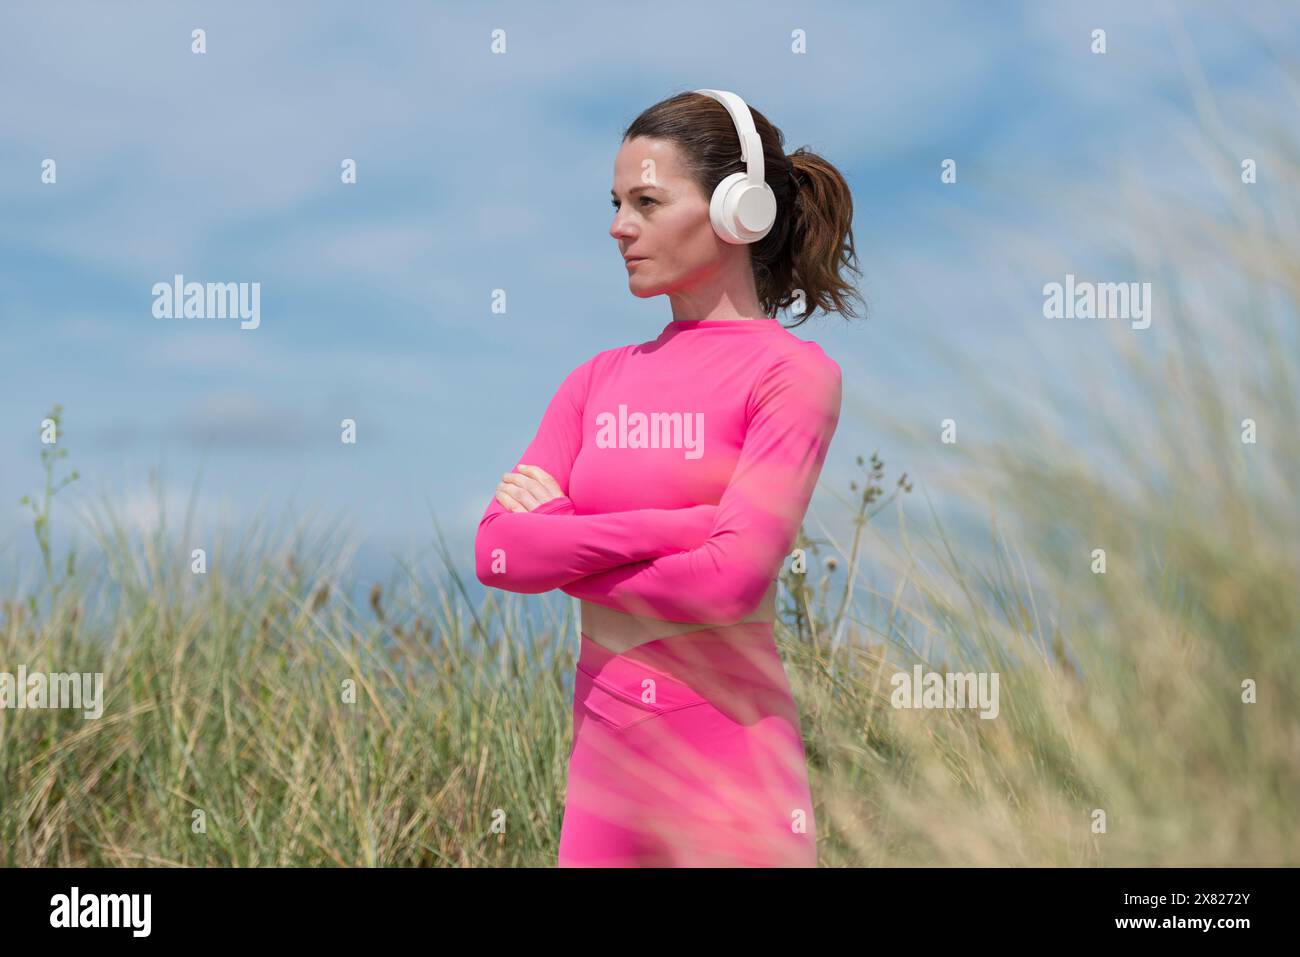 Sporty woman listening to music, wearing pink sports clothing against a blue sky Stock Photo